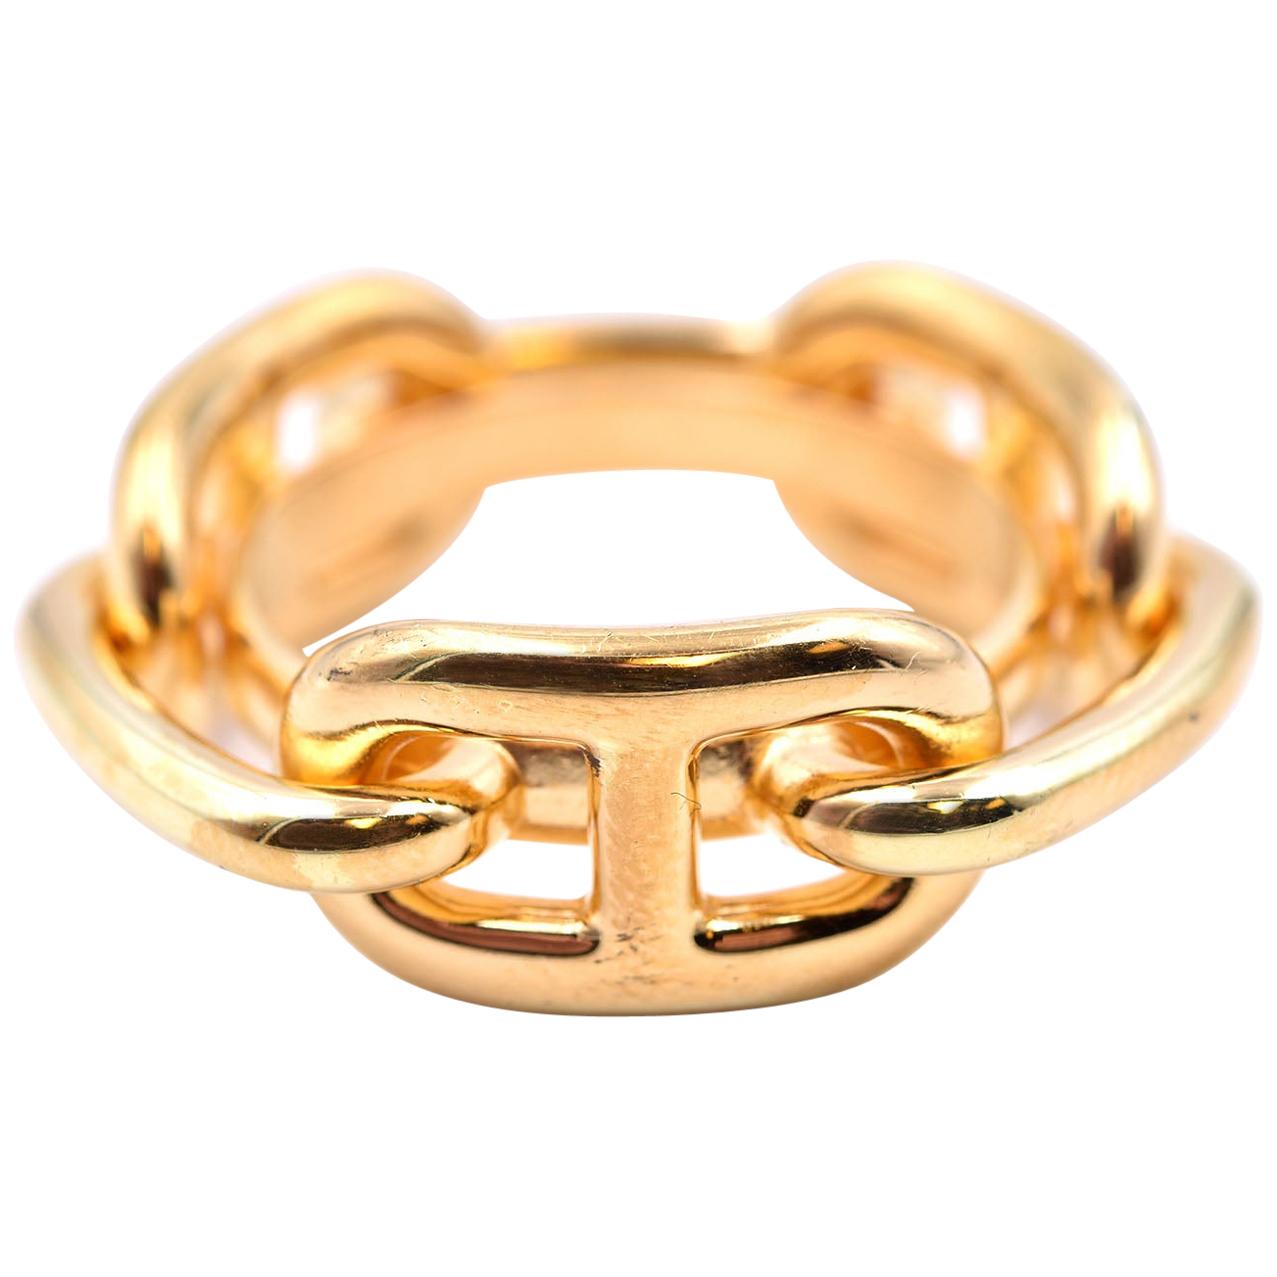 Hermes Gold-Plated “Regate” Scarf Ring